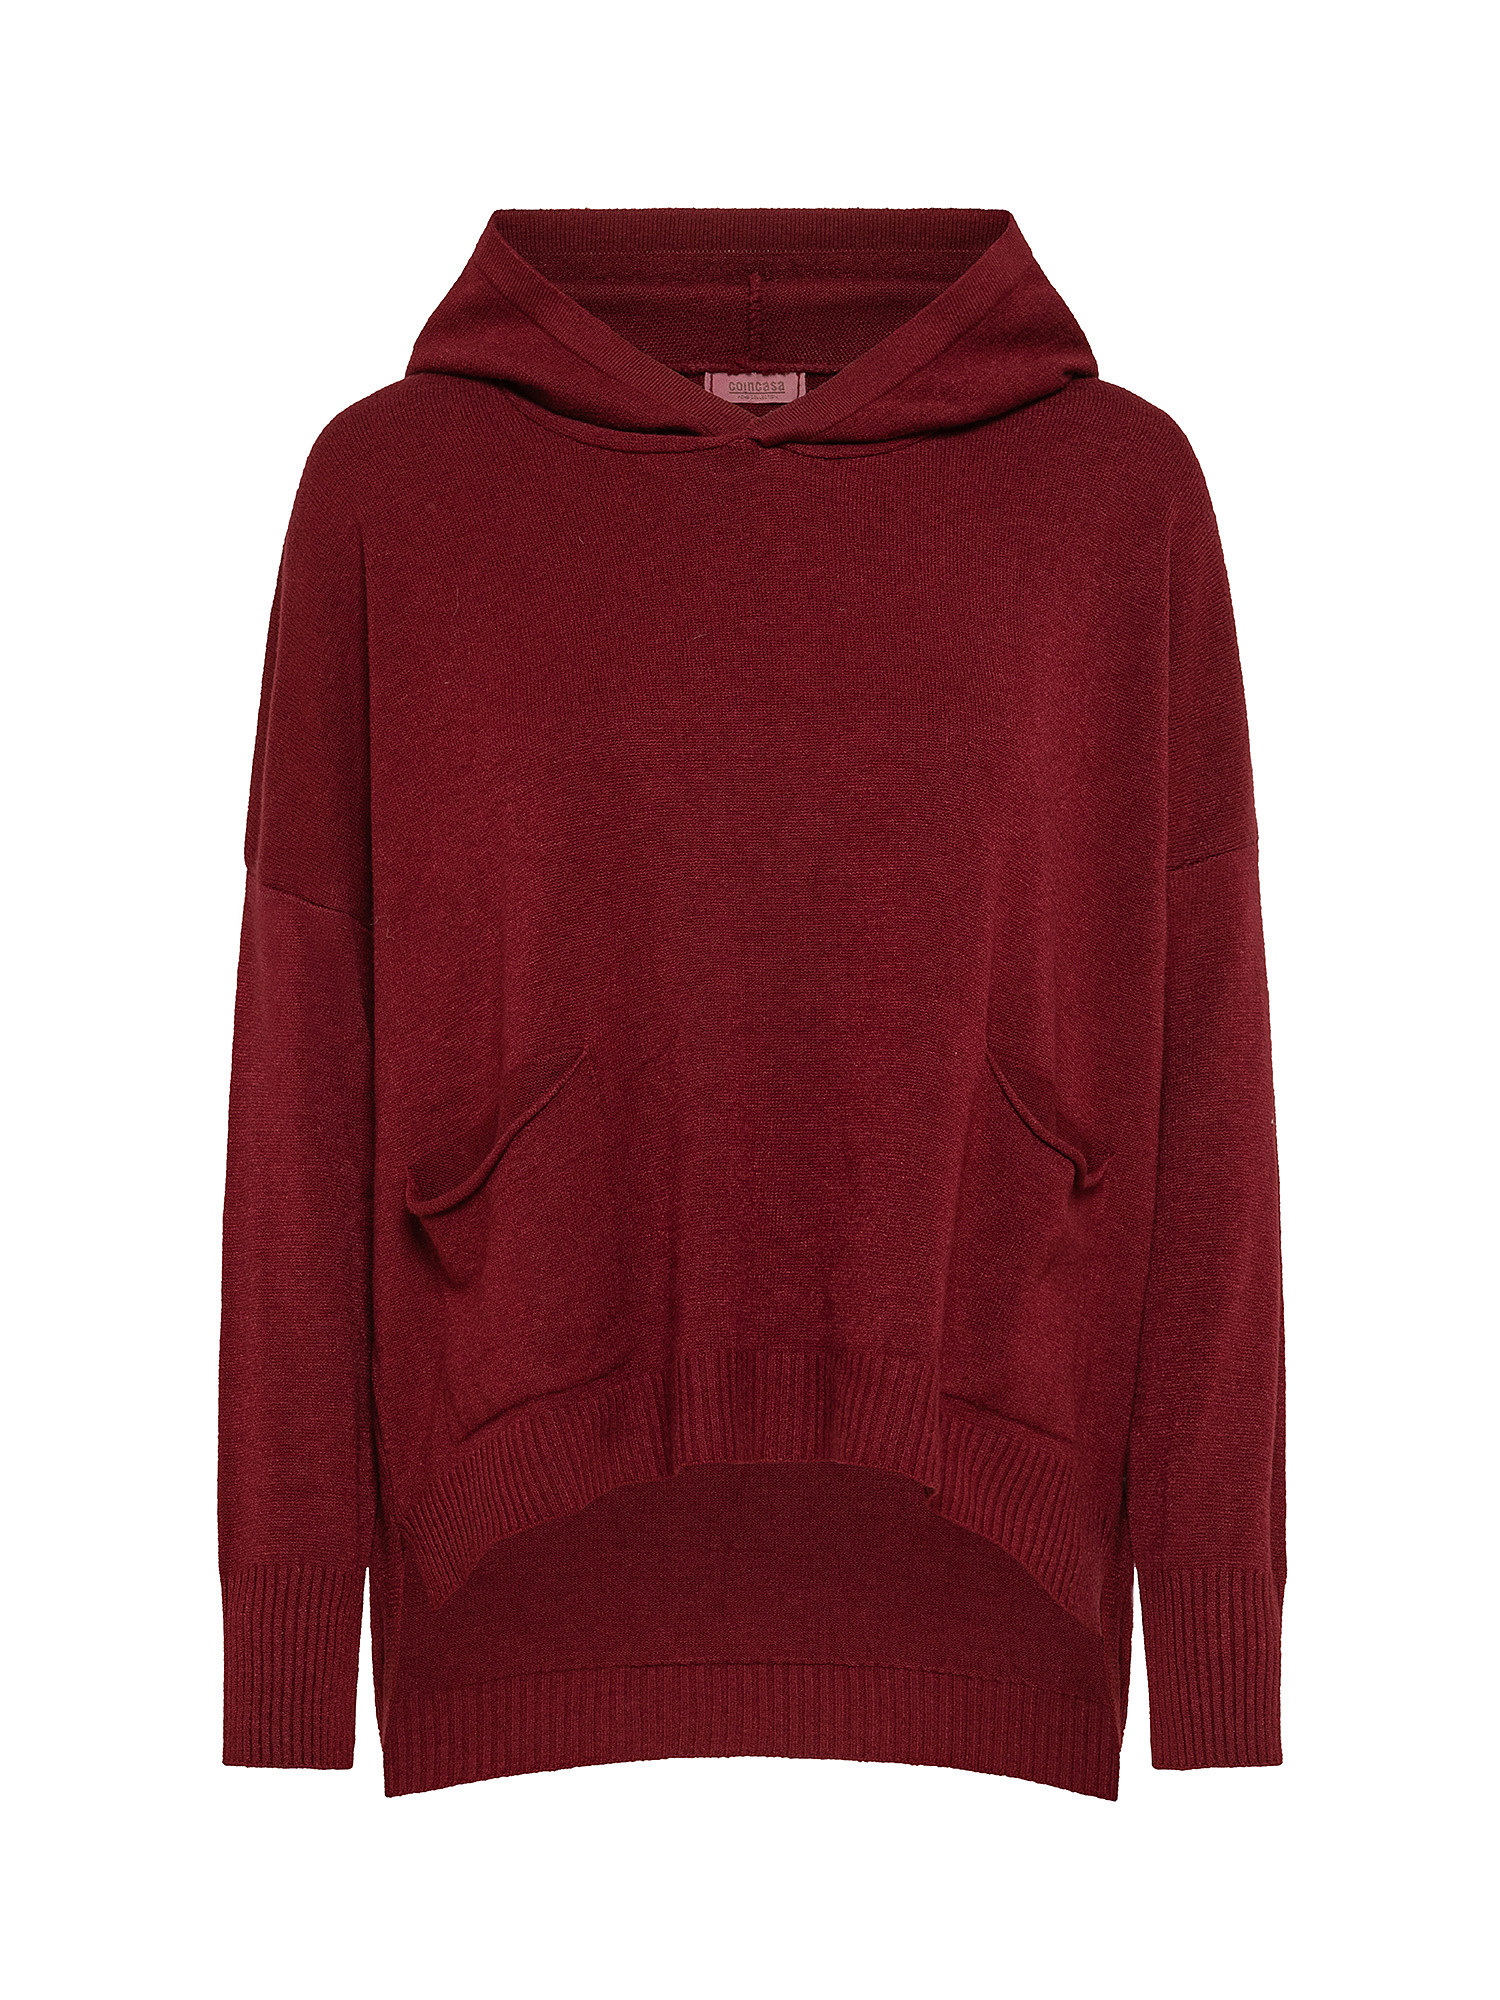 Oversized sweater with hood, Dark Red, large image number 0